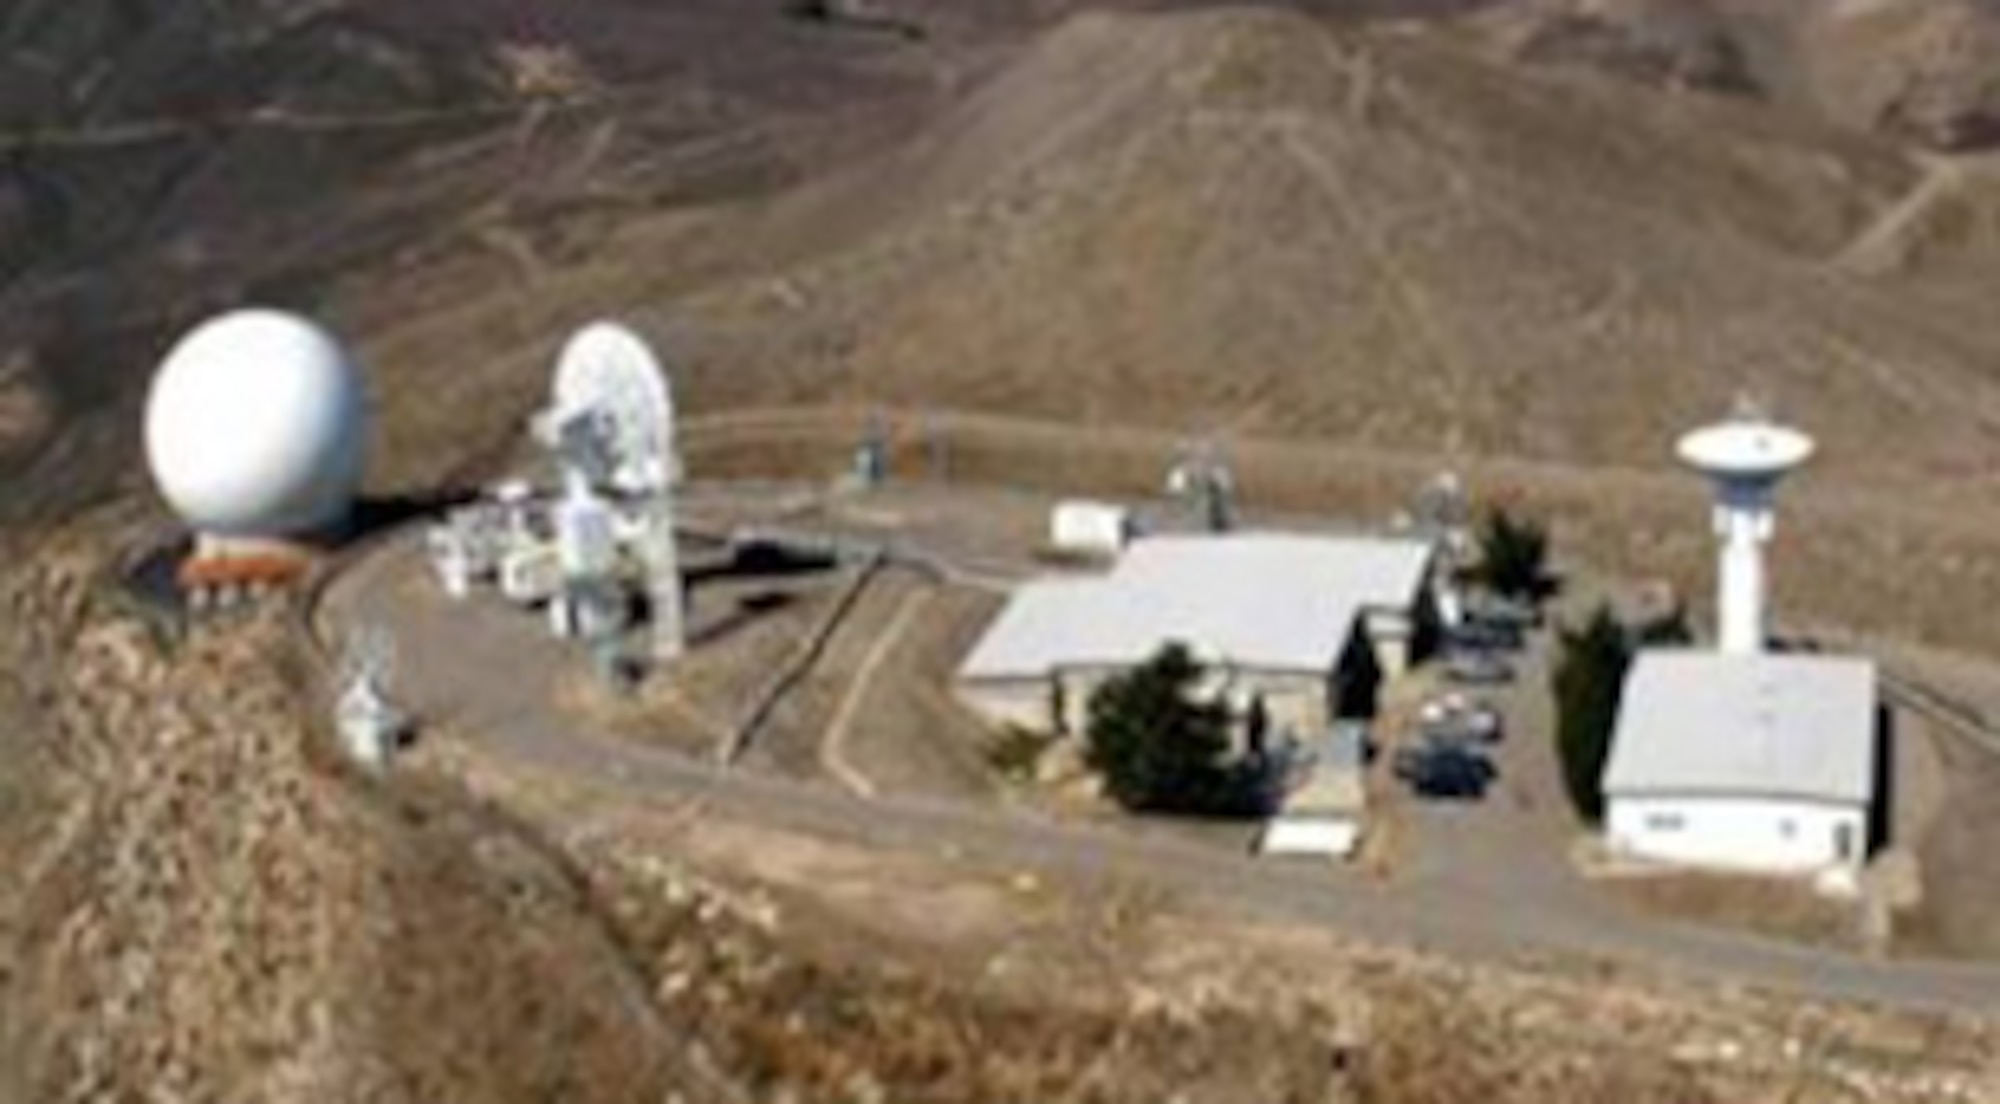 The Oak Mountain Telemetry Site at Vandenberg AFB is part of the Launch and Test Range System managed by SMC. 